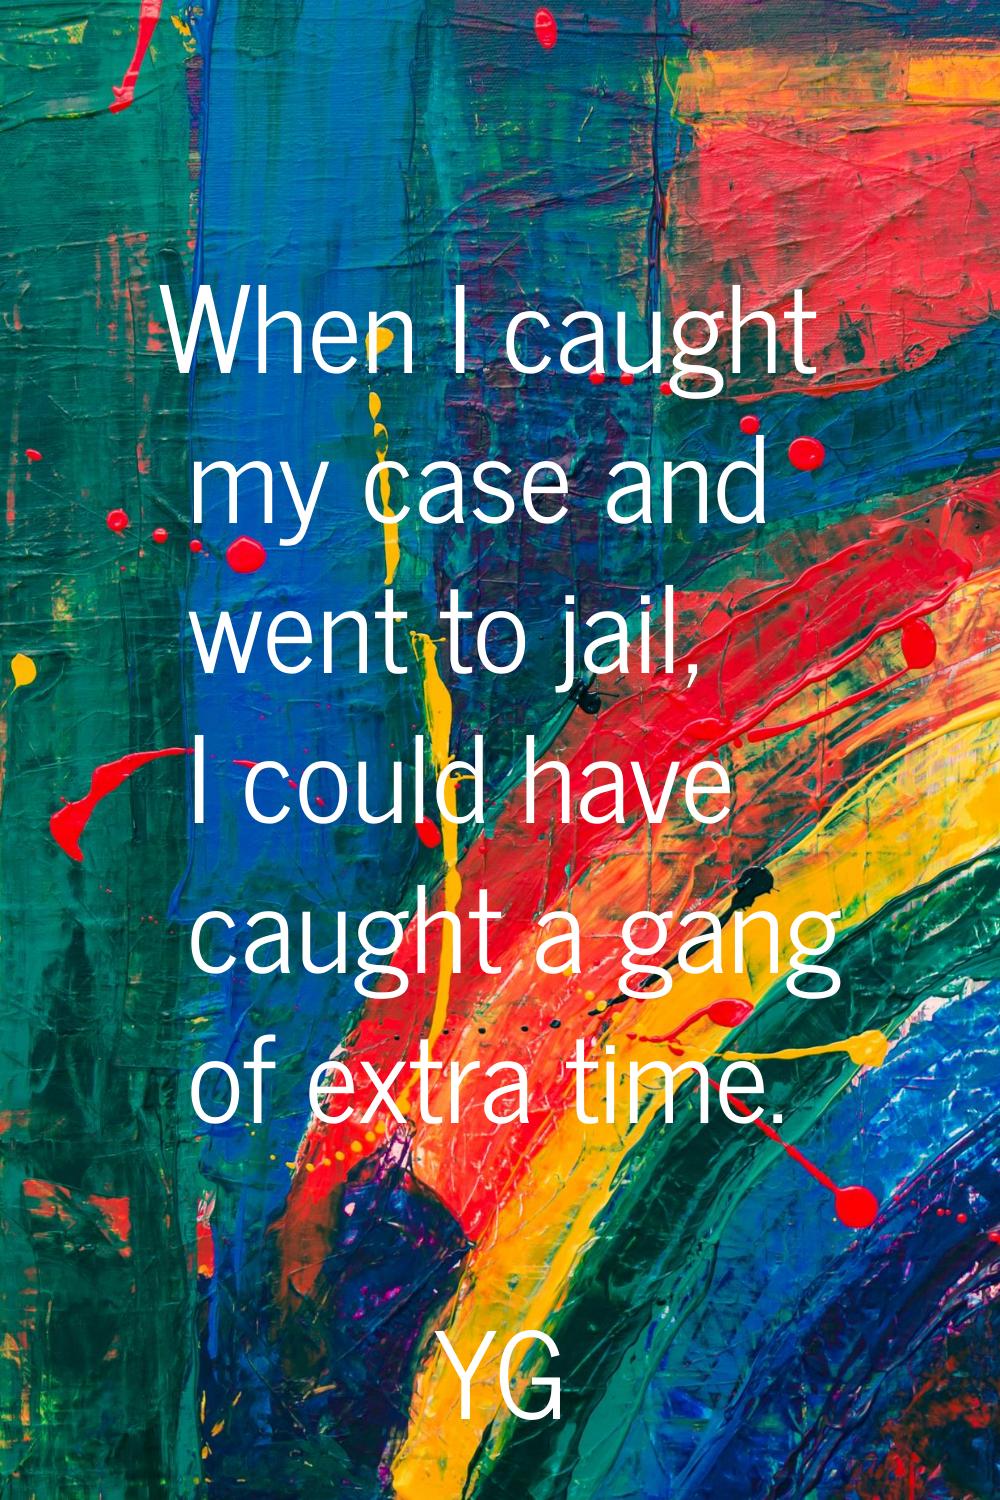 When I caught my case and went to jail, I could have caught a gang of extra time.